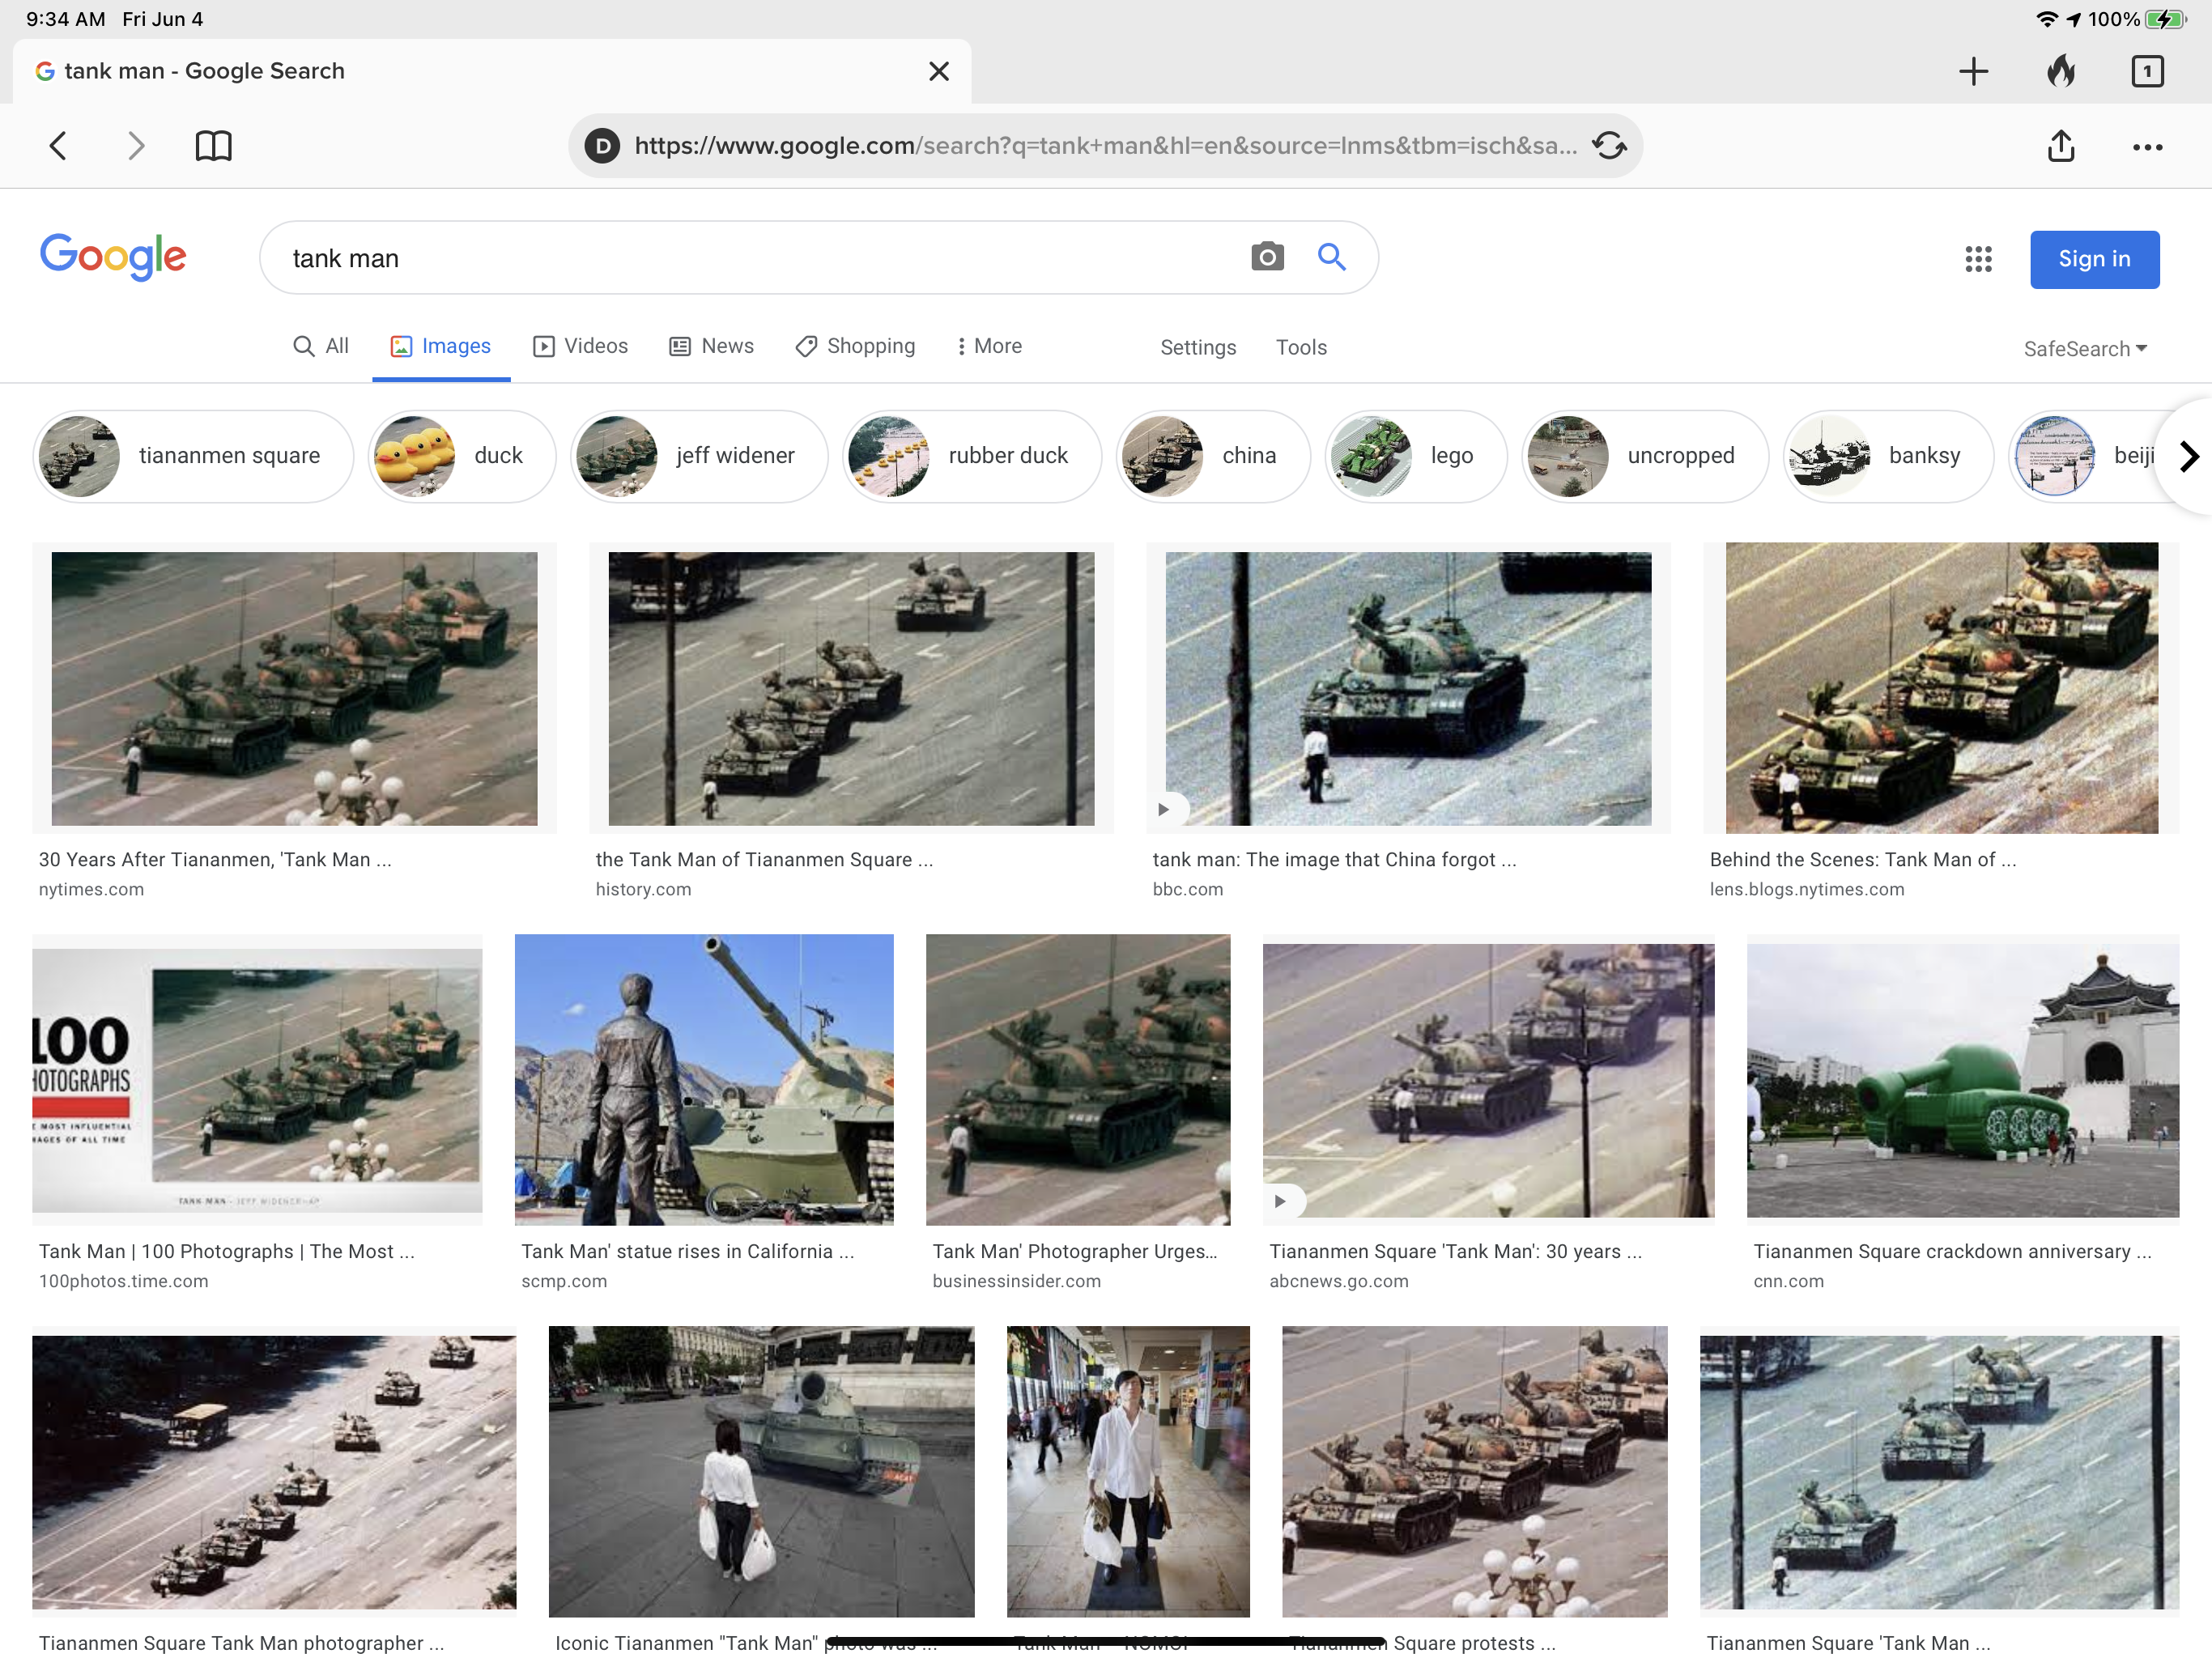 Google's default settings search result for "tank man"